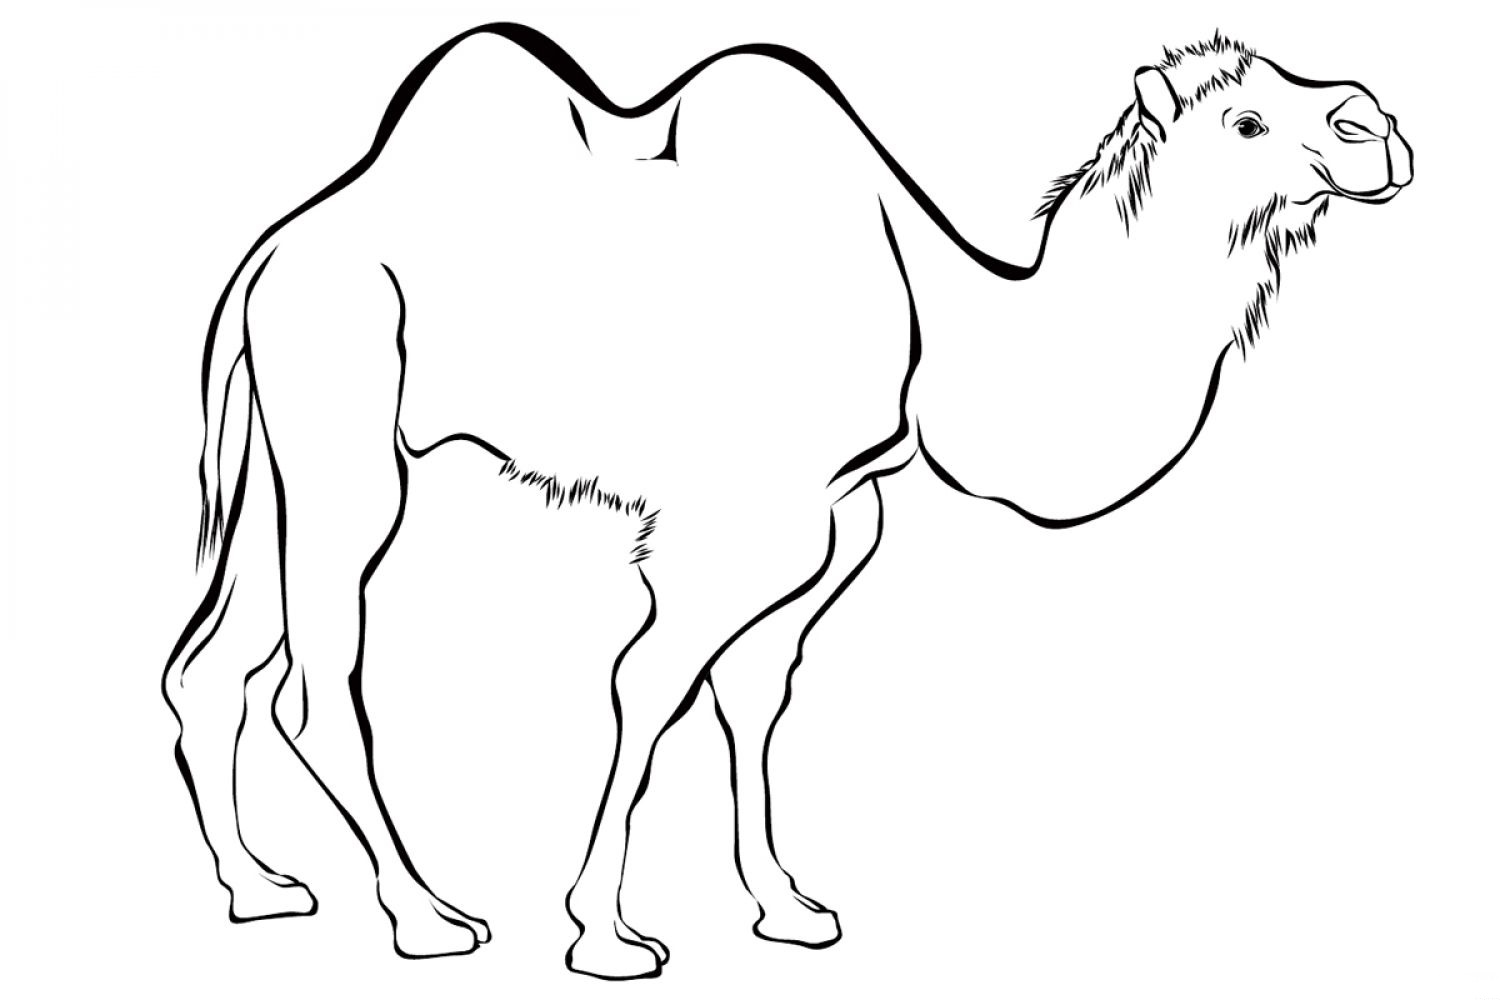 How to Draw a Camel - Really Easy Drawing Tutorial | Easy animal drawings,  Cute easy animal drawings, Drawing tutorial easy